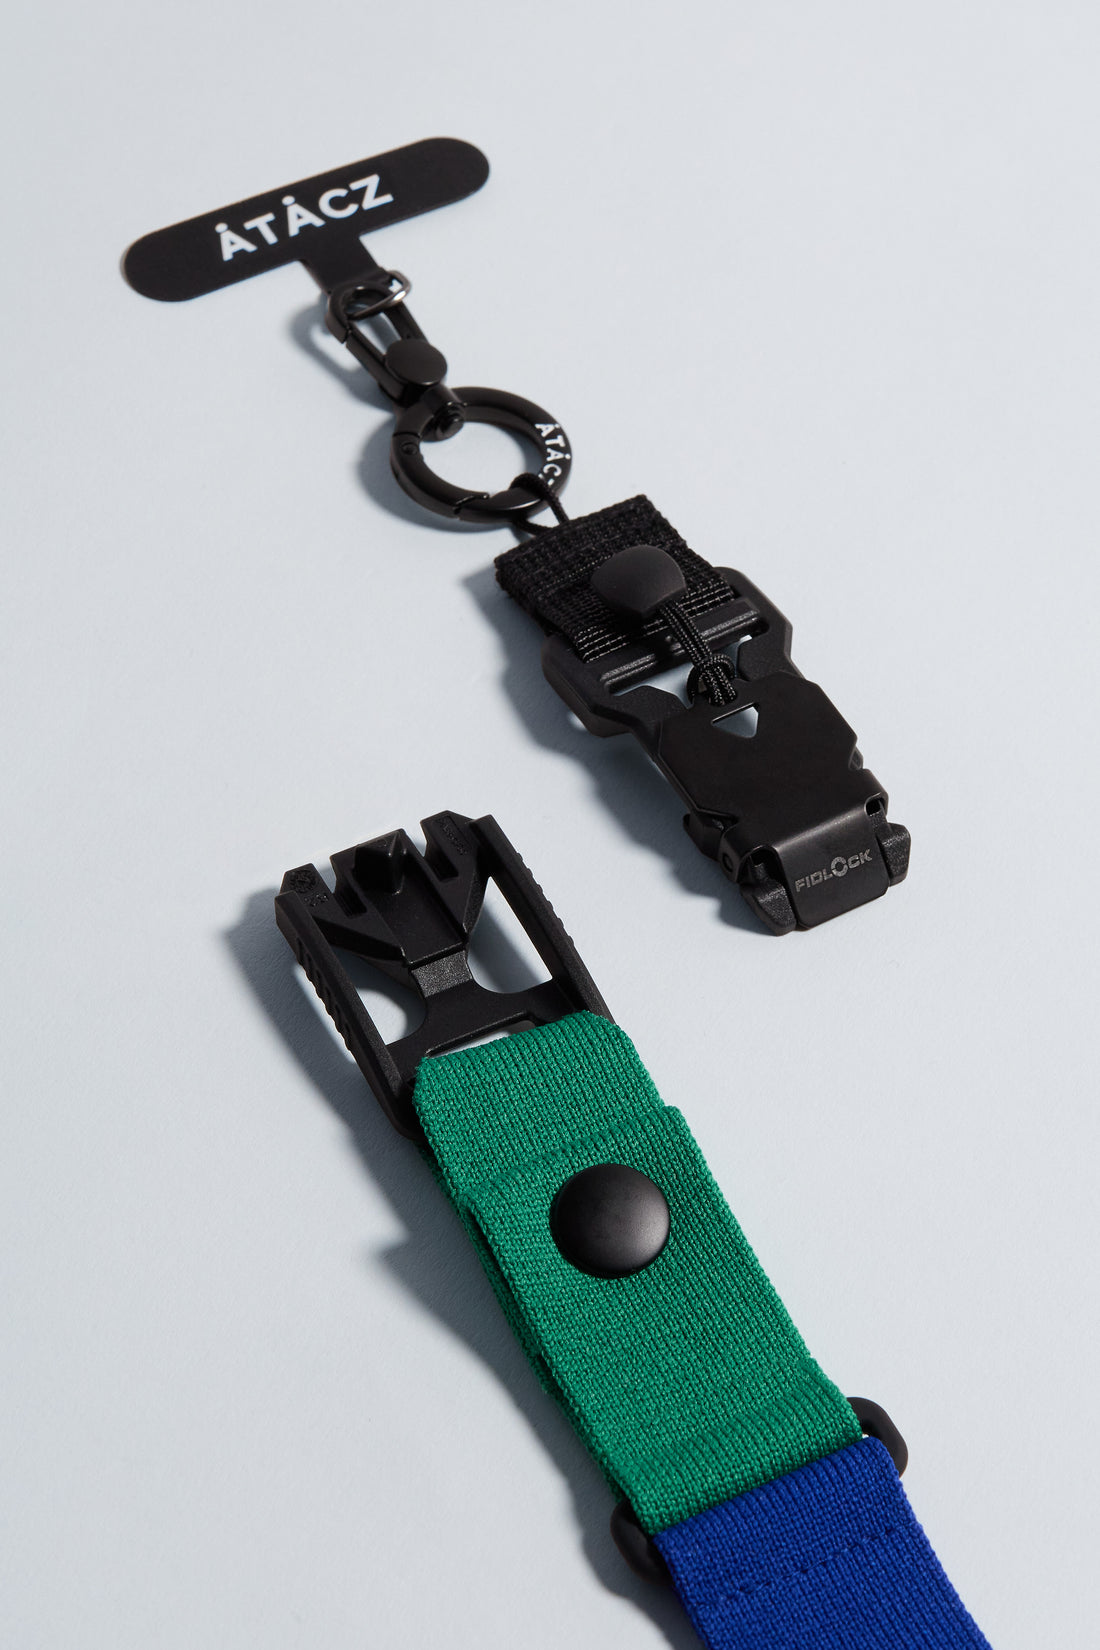 The CONNECT 2-in-1 sling-to-handle length, crafted from 100% recycled Repreve Nylon, combines premium materials with durable knitting technology. The FIDLOCK Buckle handles high tensile forces, and the quick-release feature ensures convenience. Plus, the universal Strap Card makes it compatible with all iPhone and Android cases.